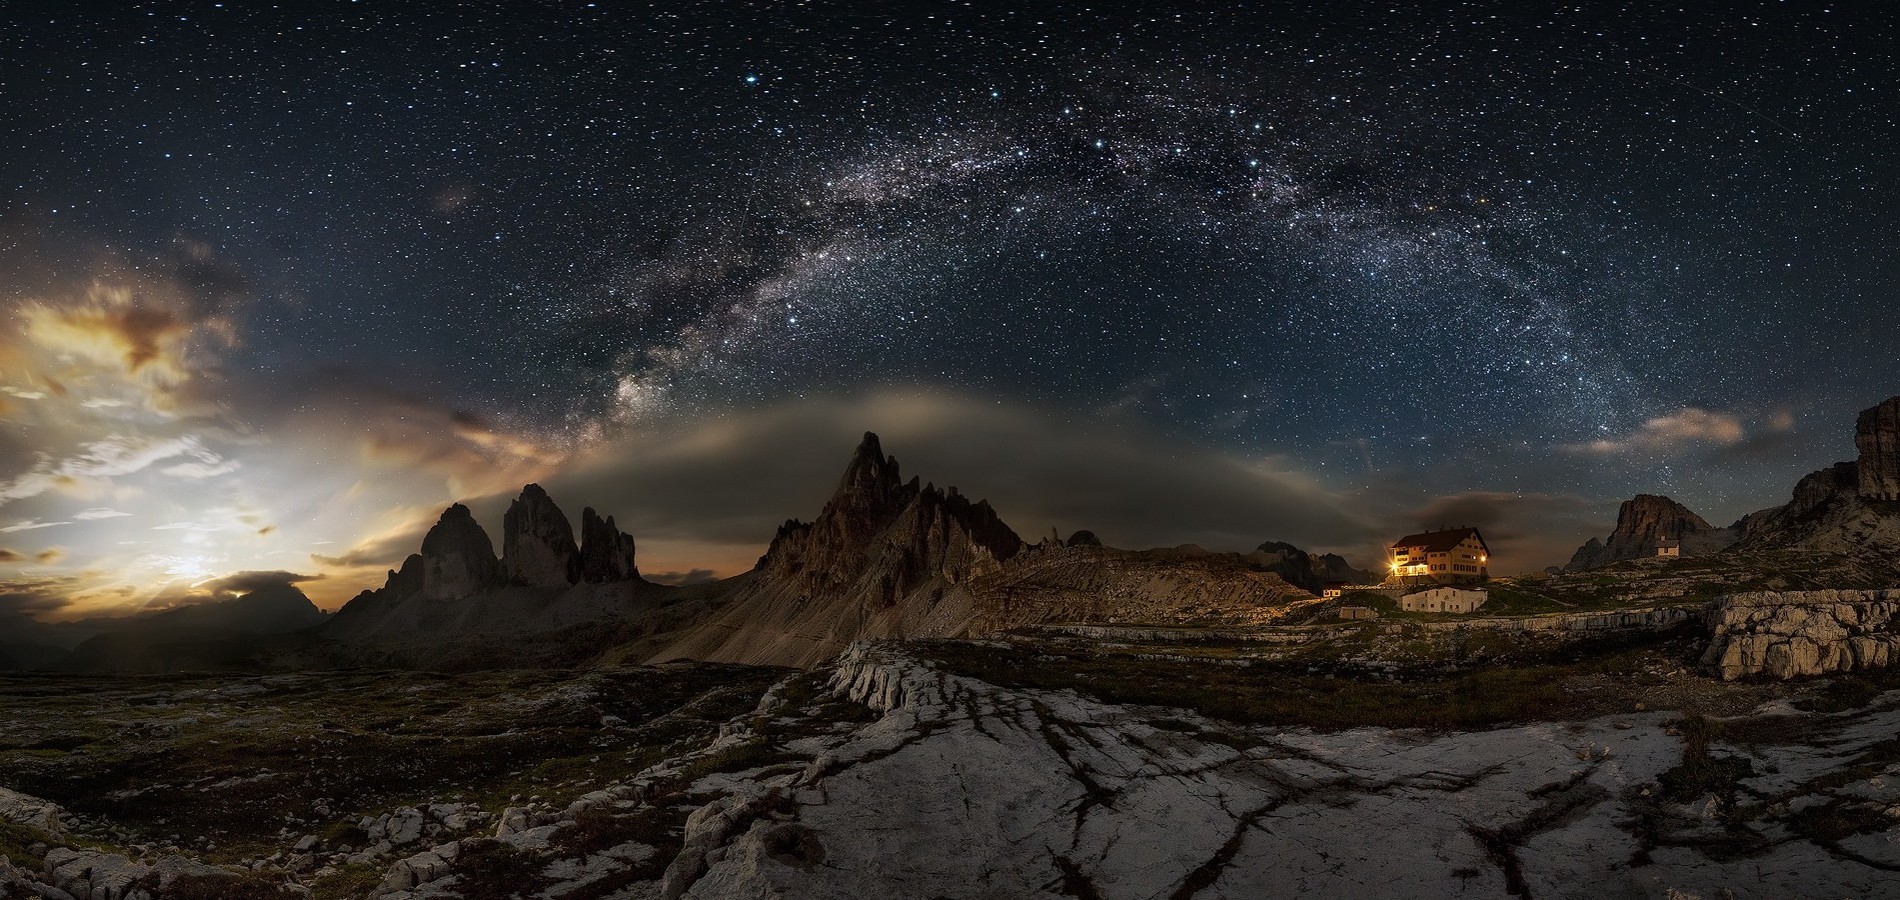 nature, Landscape, Photography, Panoramas, Milky Way, Dolomites (mountains), Starry Night, Summer, Galaxy, Building, Cabin, Lights, Long Exposure, Italy Wallpaper